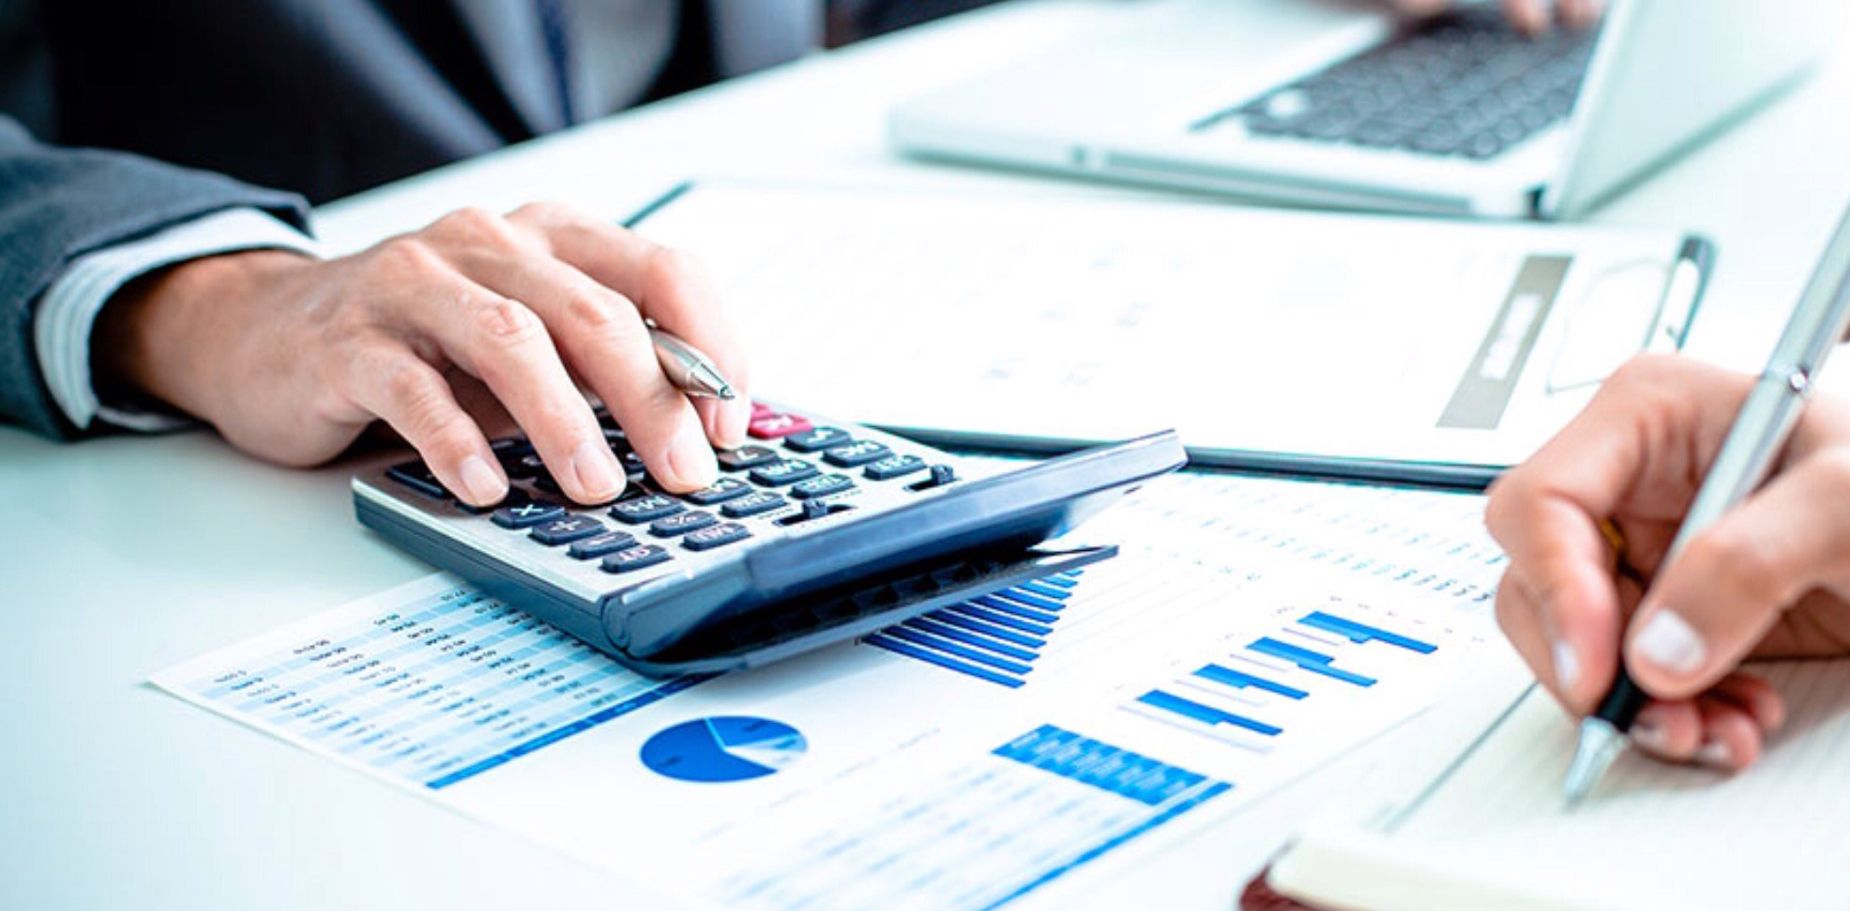 Hire Small Business Tax Accountants in the UK at Affordable Rates